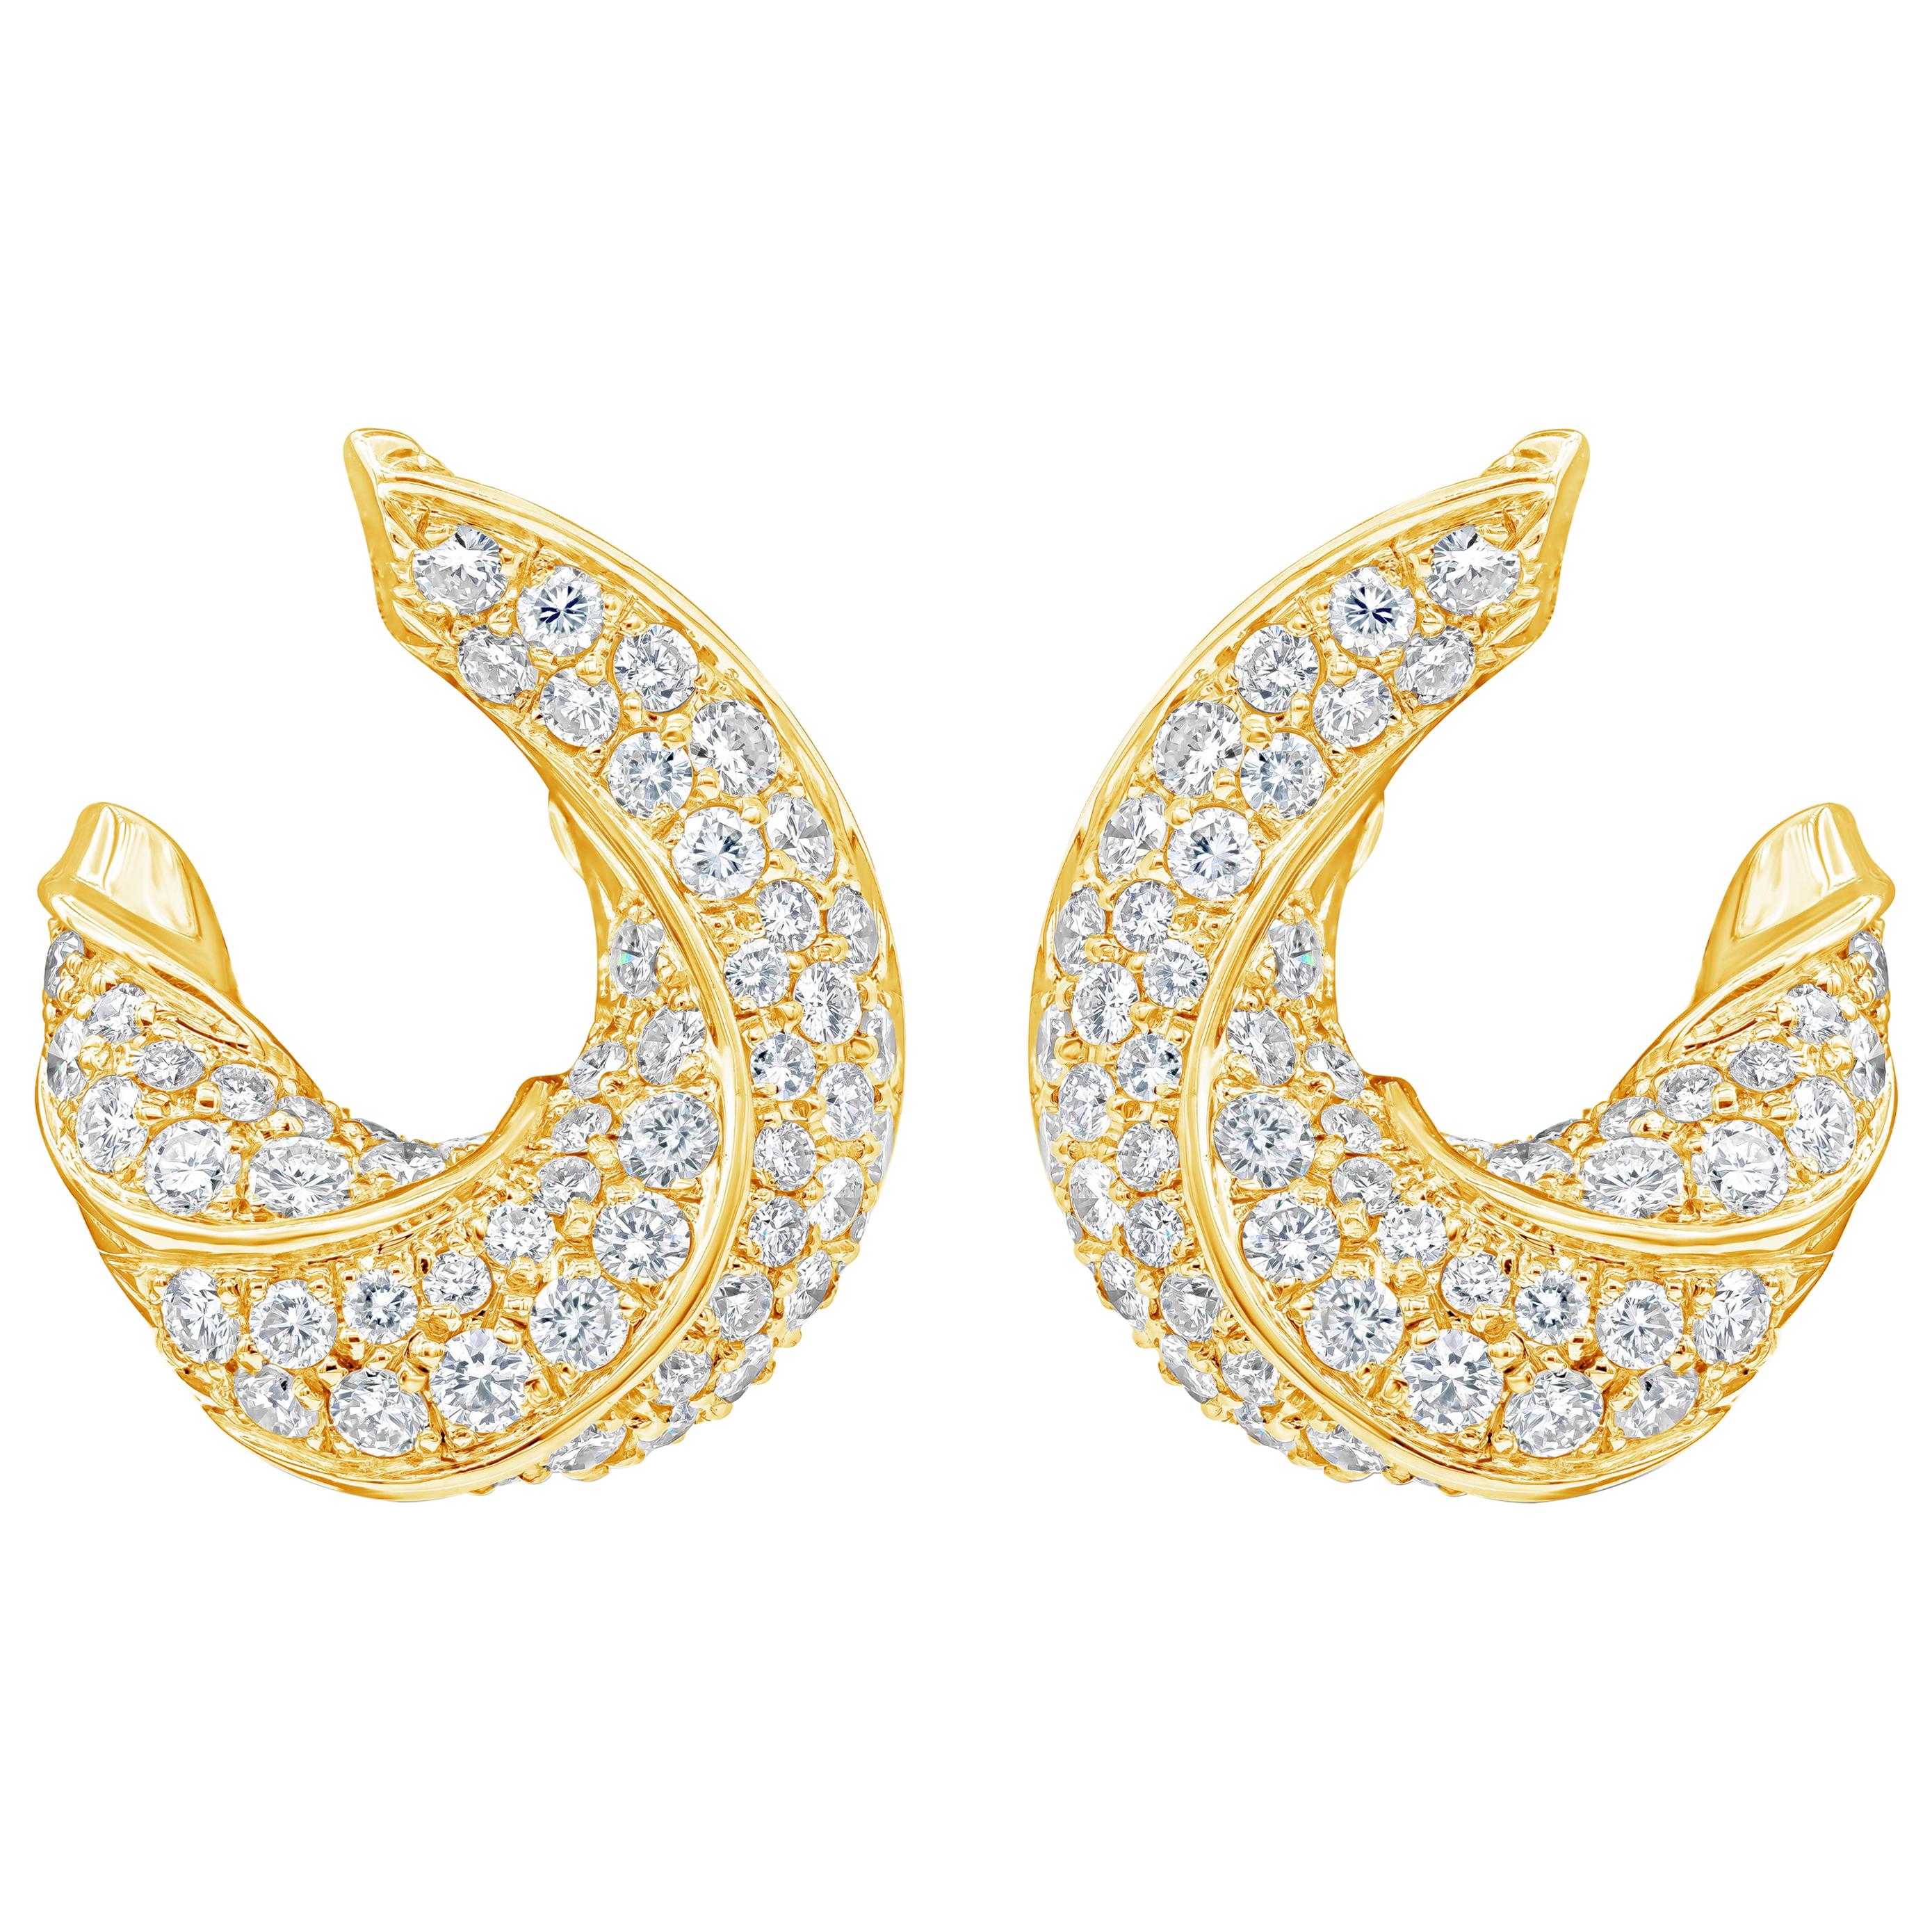 Roman Malakov 7.03 Carats Total Brilliant Round Diamond Twisted Clip-On Earrings For Sale